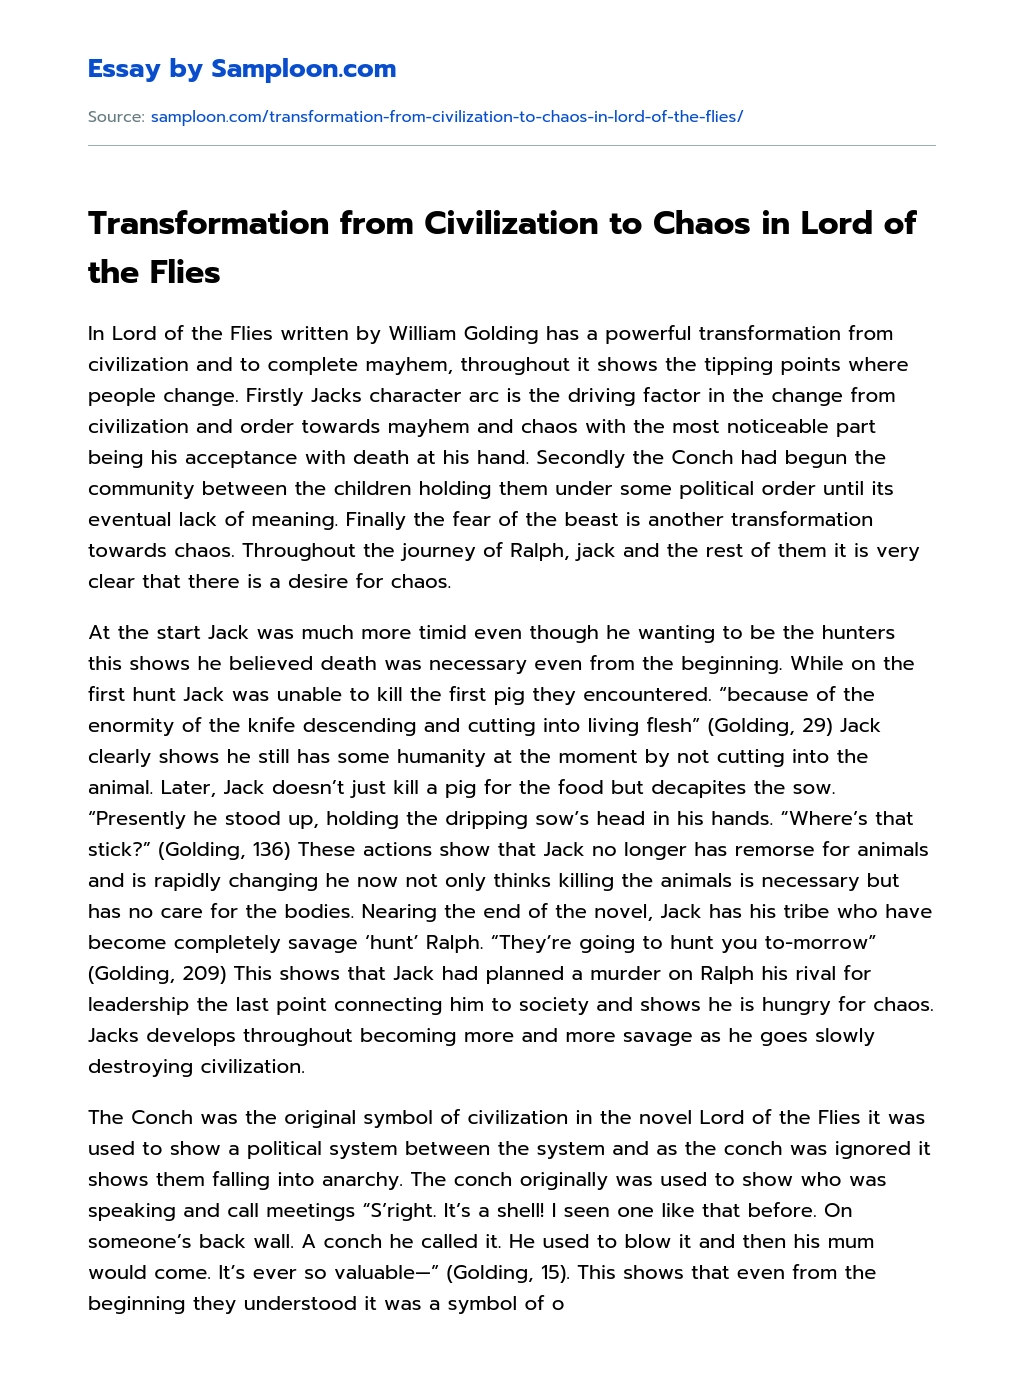 Transformation from Civilization to Chaos in Lord of the Flies essay